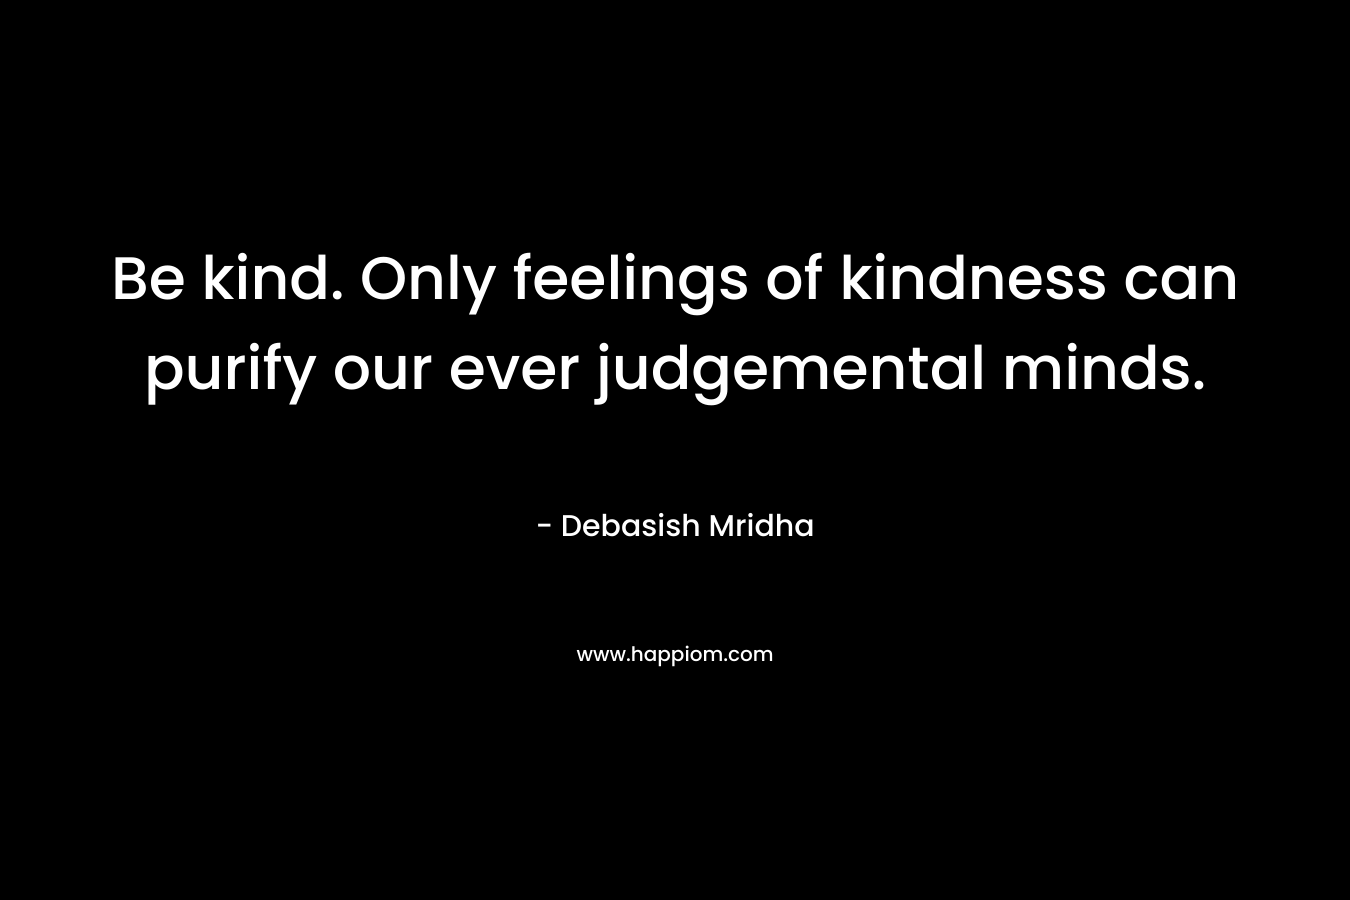 Be kind. Only feelings of kindness can purify our ever judgemental minds.